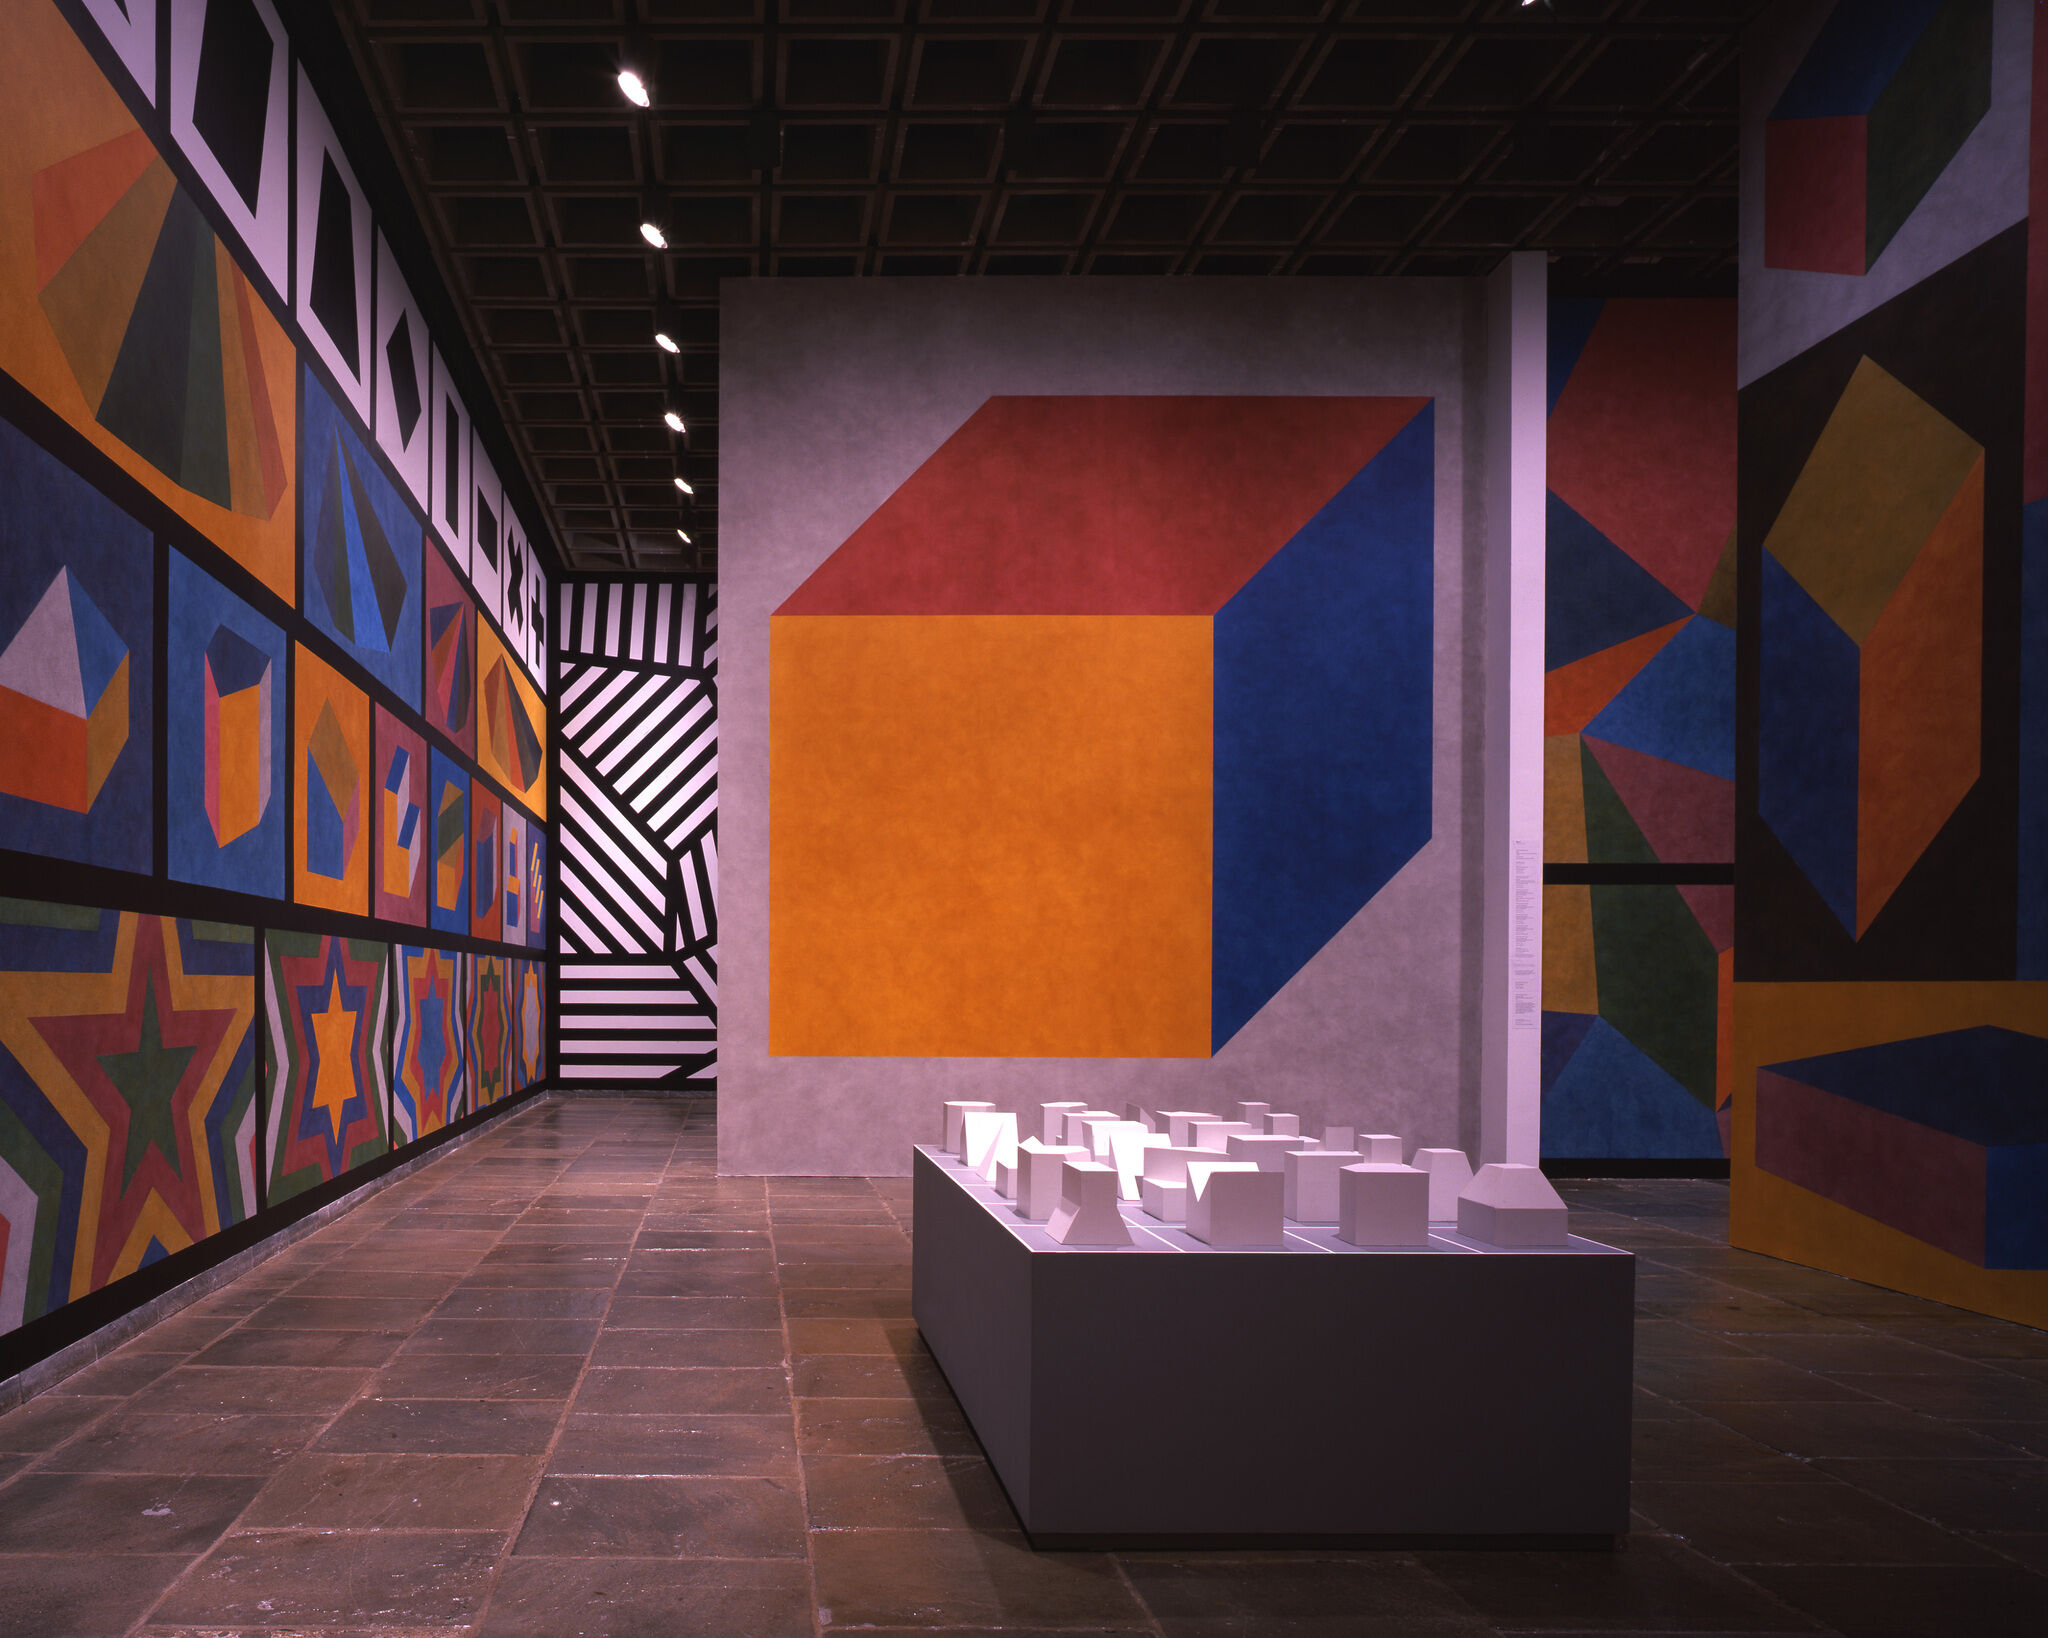 A gallery with walls covered in colorful geometric works of art and a display of small white geometric sculptures.